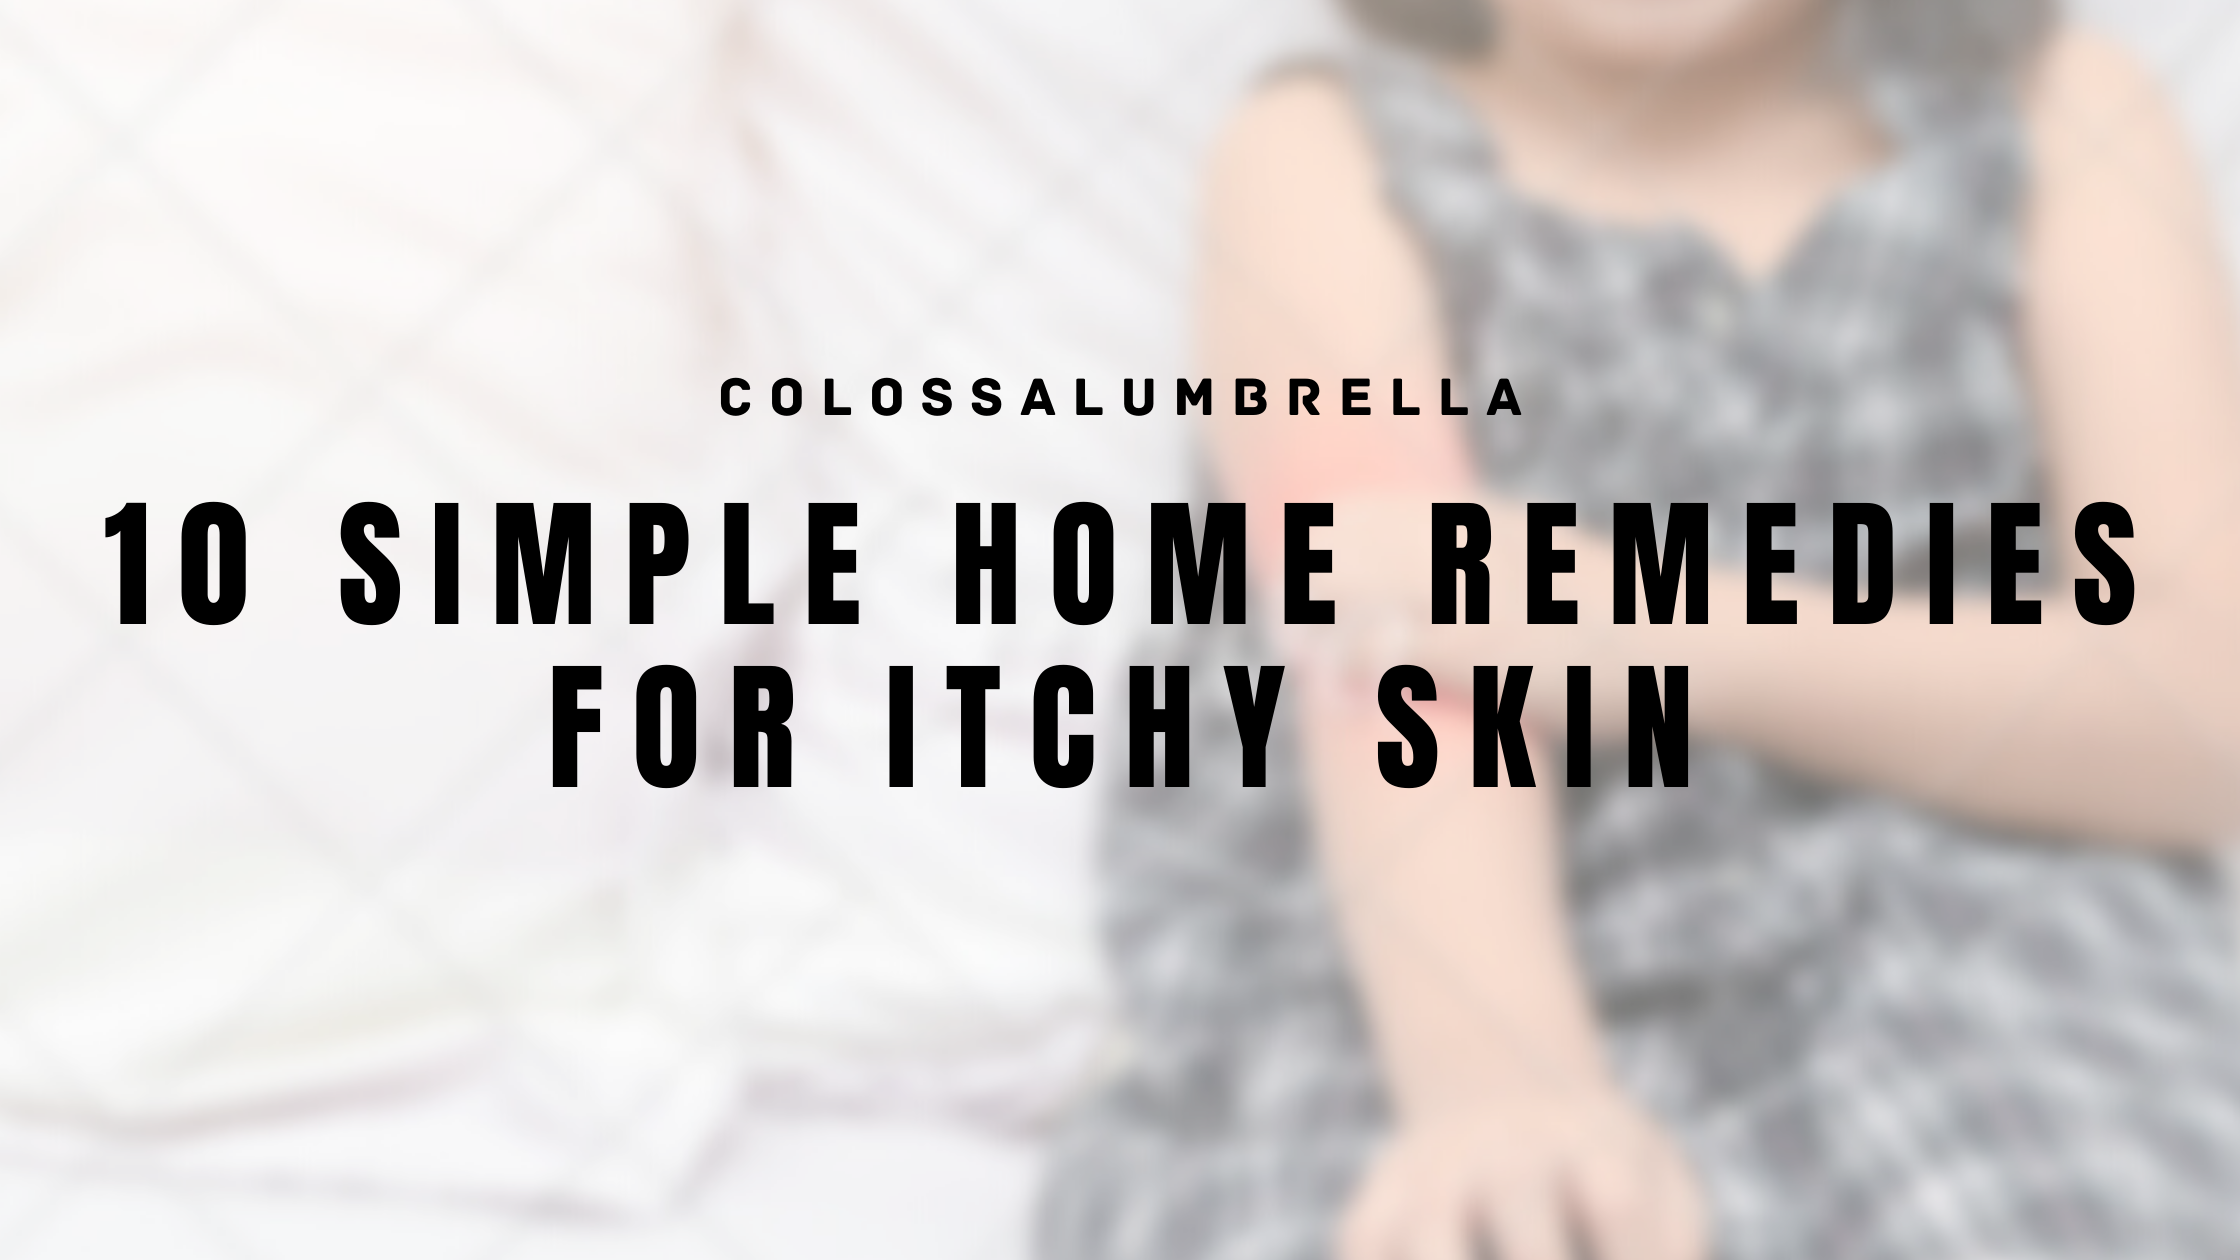 Simple home remedies for itchy skin